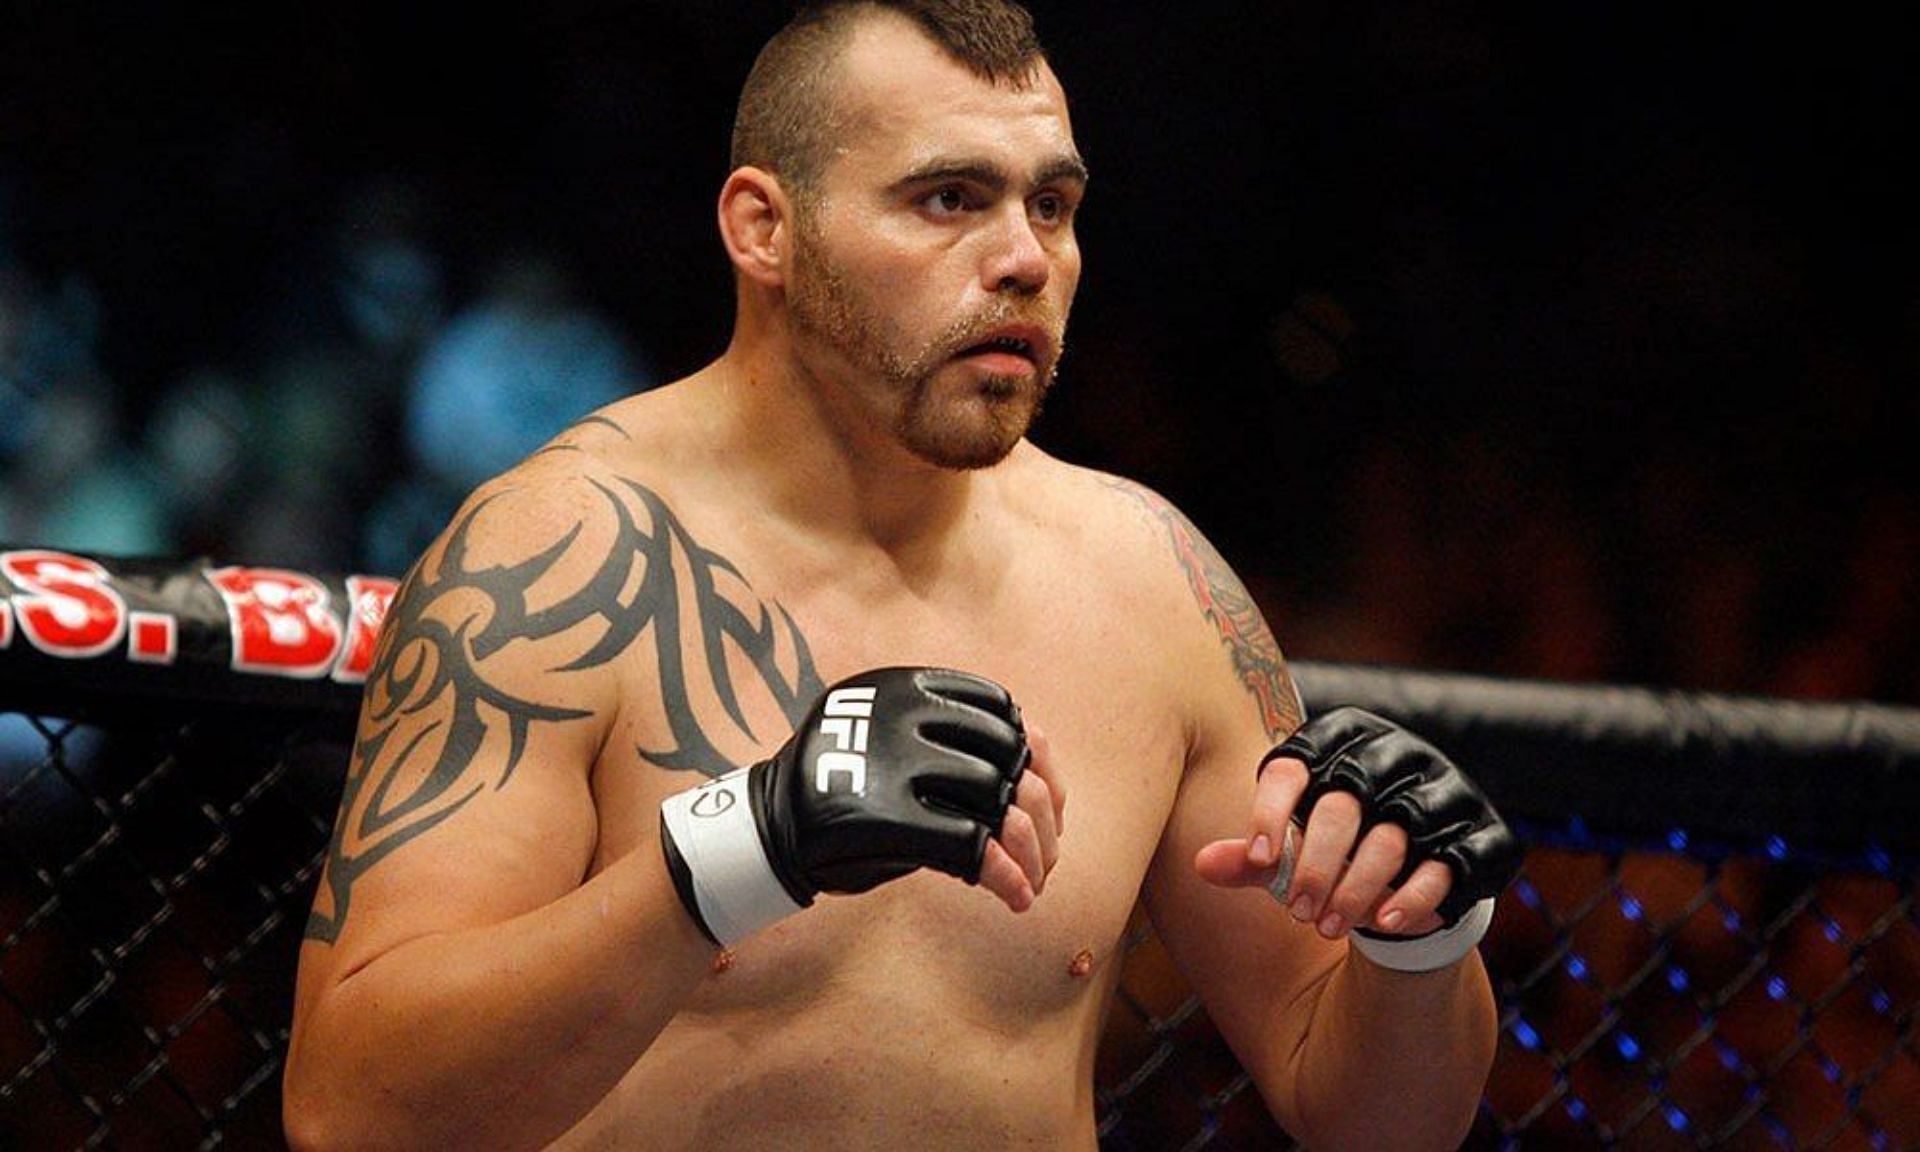 Tim Sylvia admitted to using performance enhancing drugs in an attempt to improve his physique